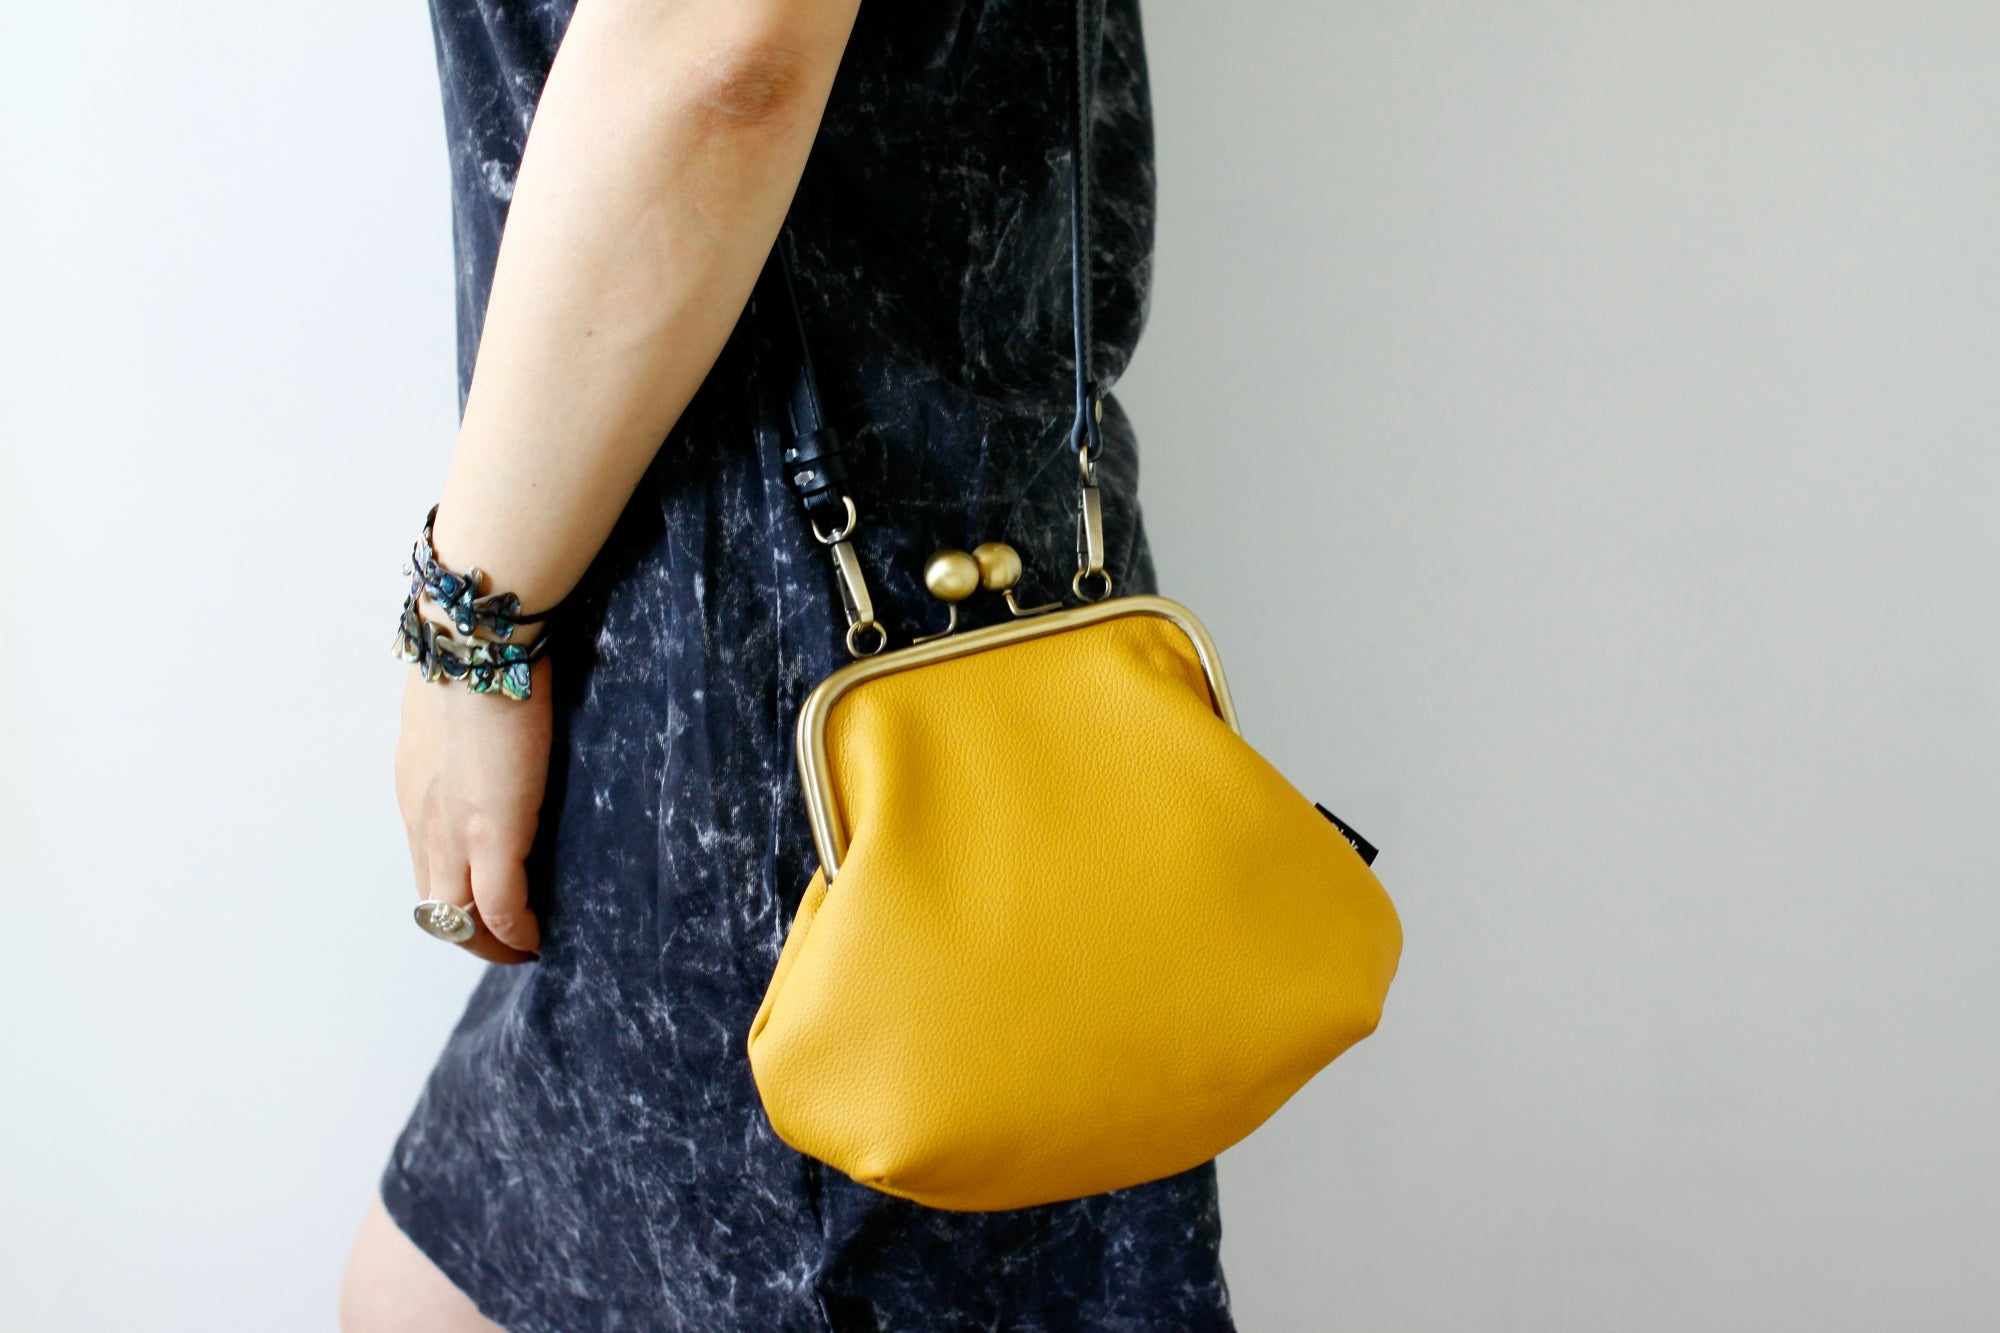 Mustard Leather Kisslock Bag with Strap | PINKOASIS